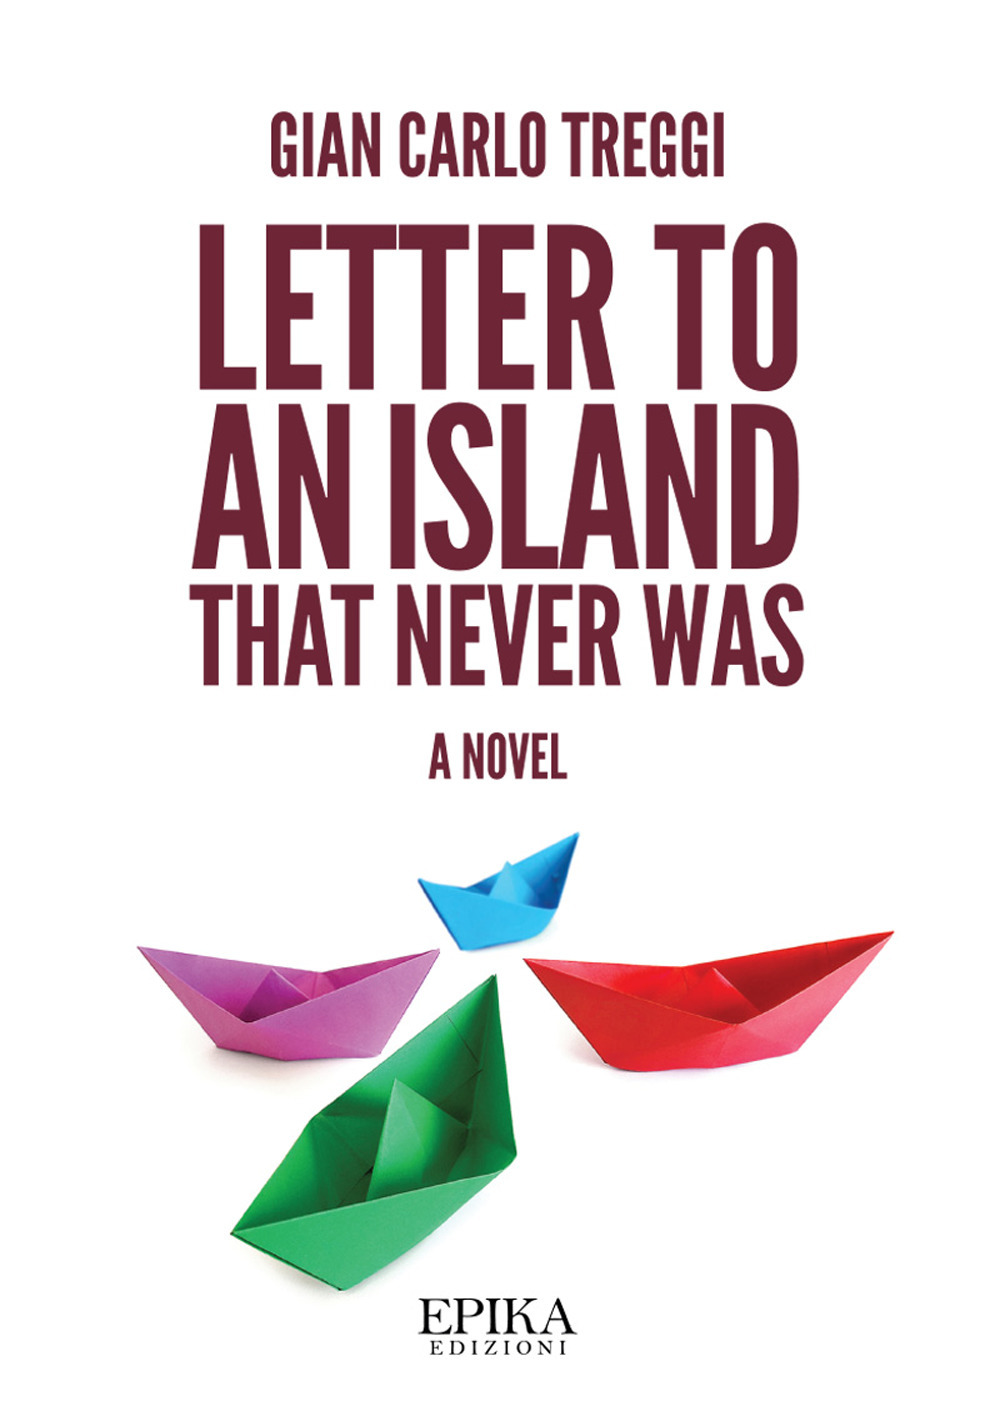 Letter to an island that never was